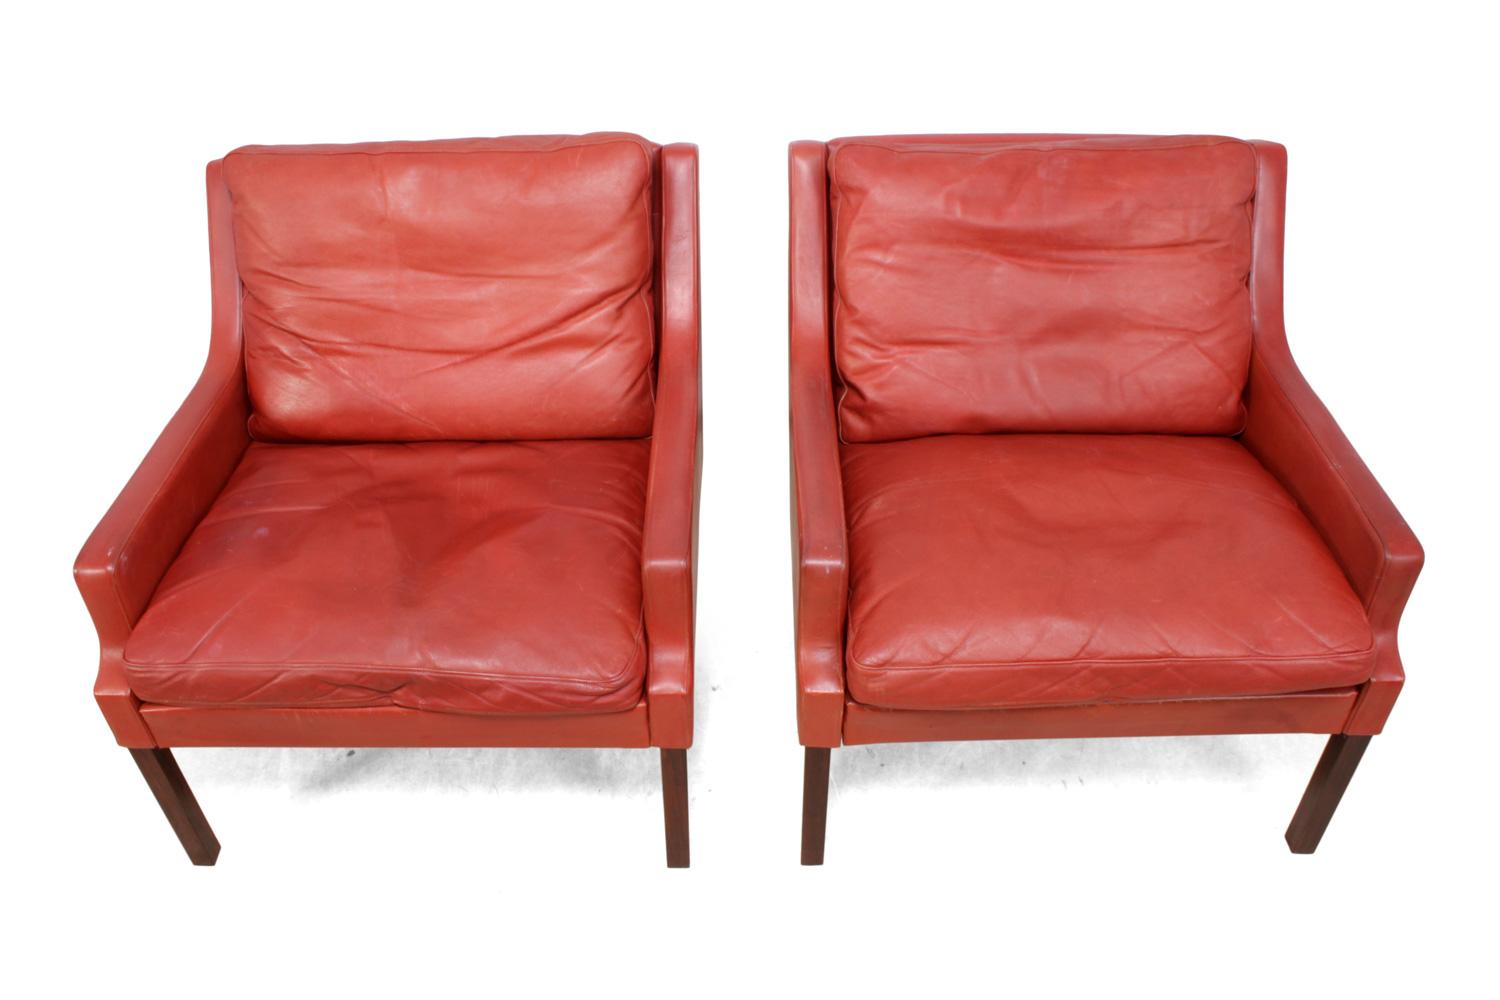 Mid-20th Century Danish Lounge Chairs in Red Leather with Stools For Sale